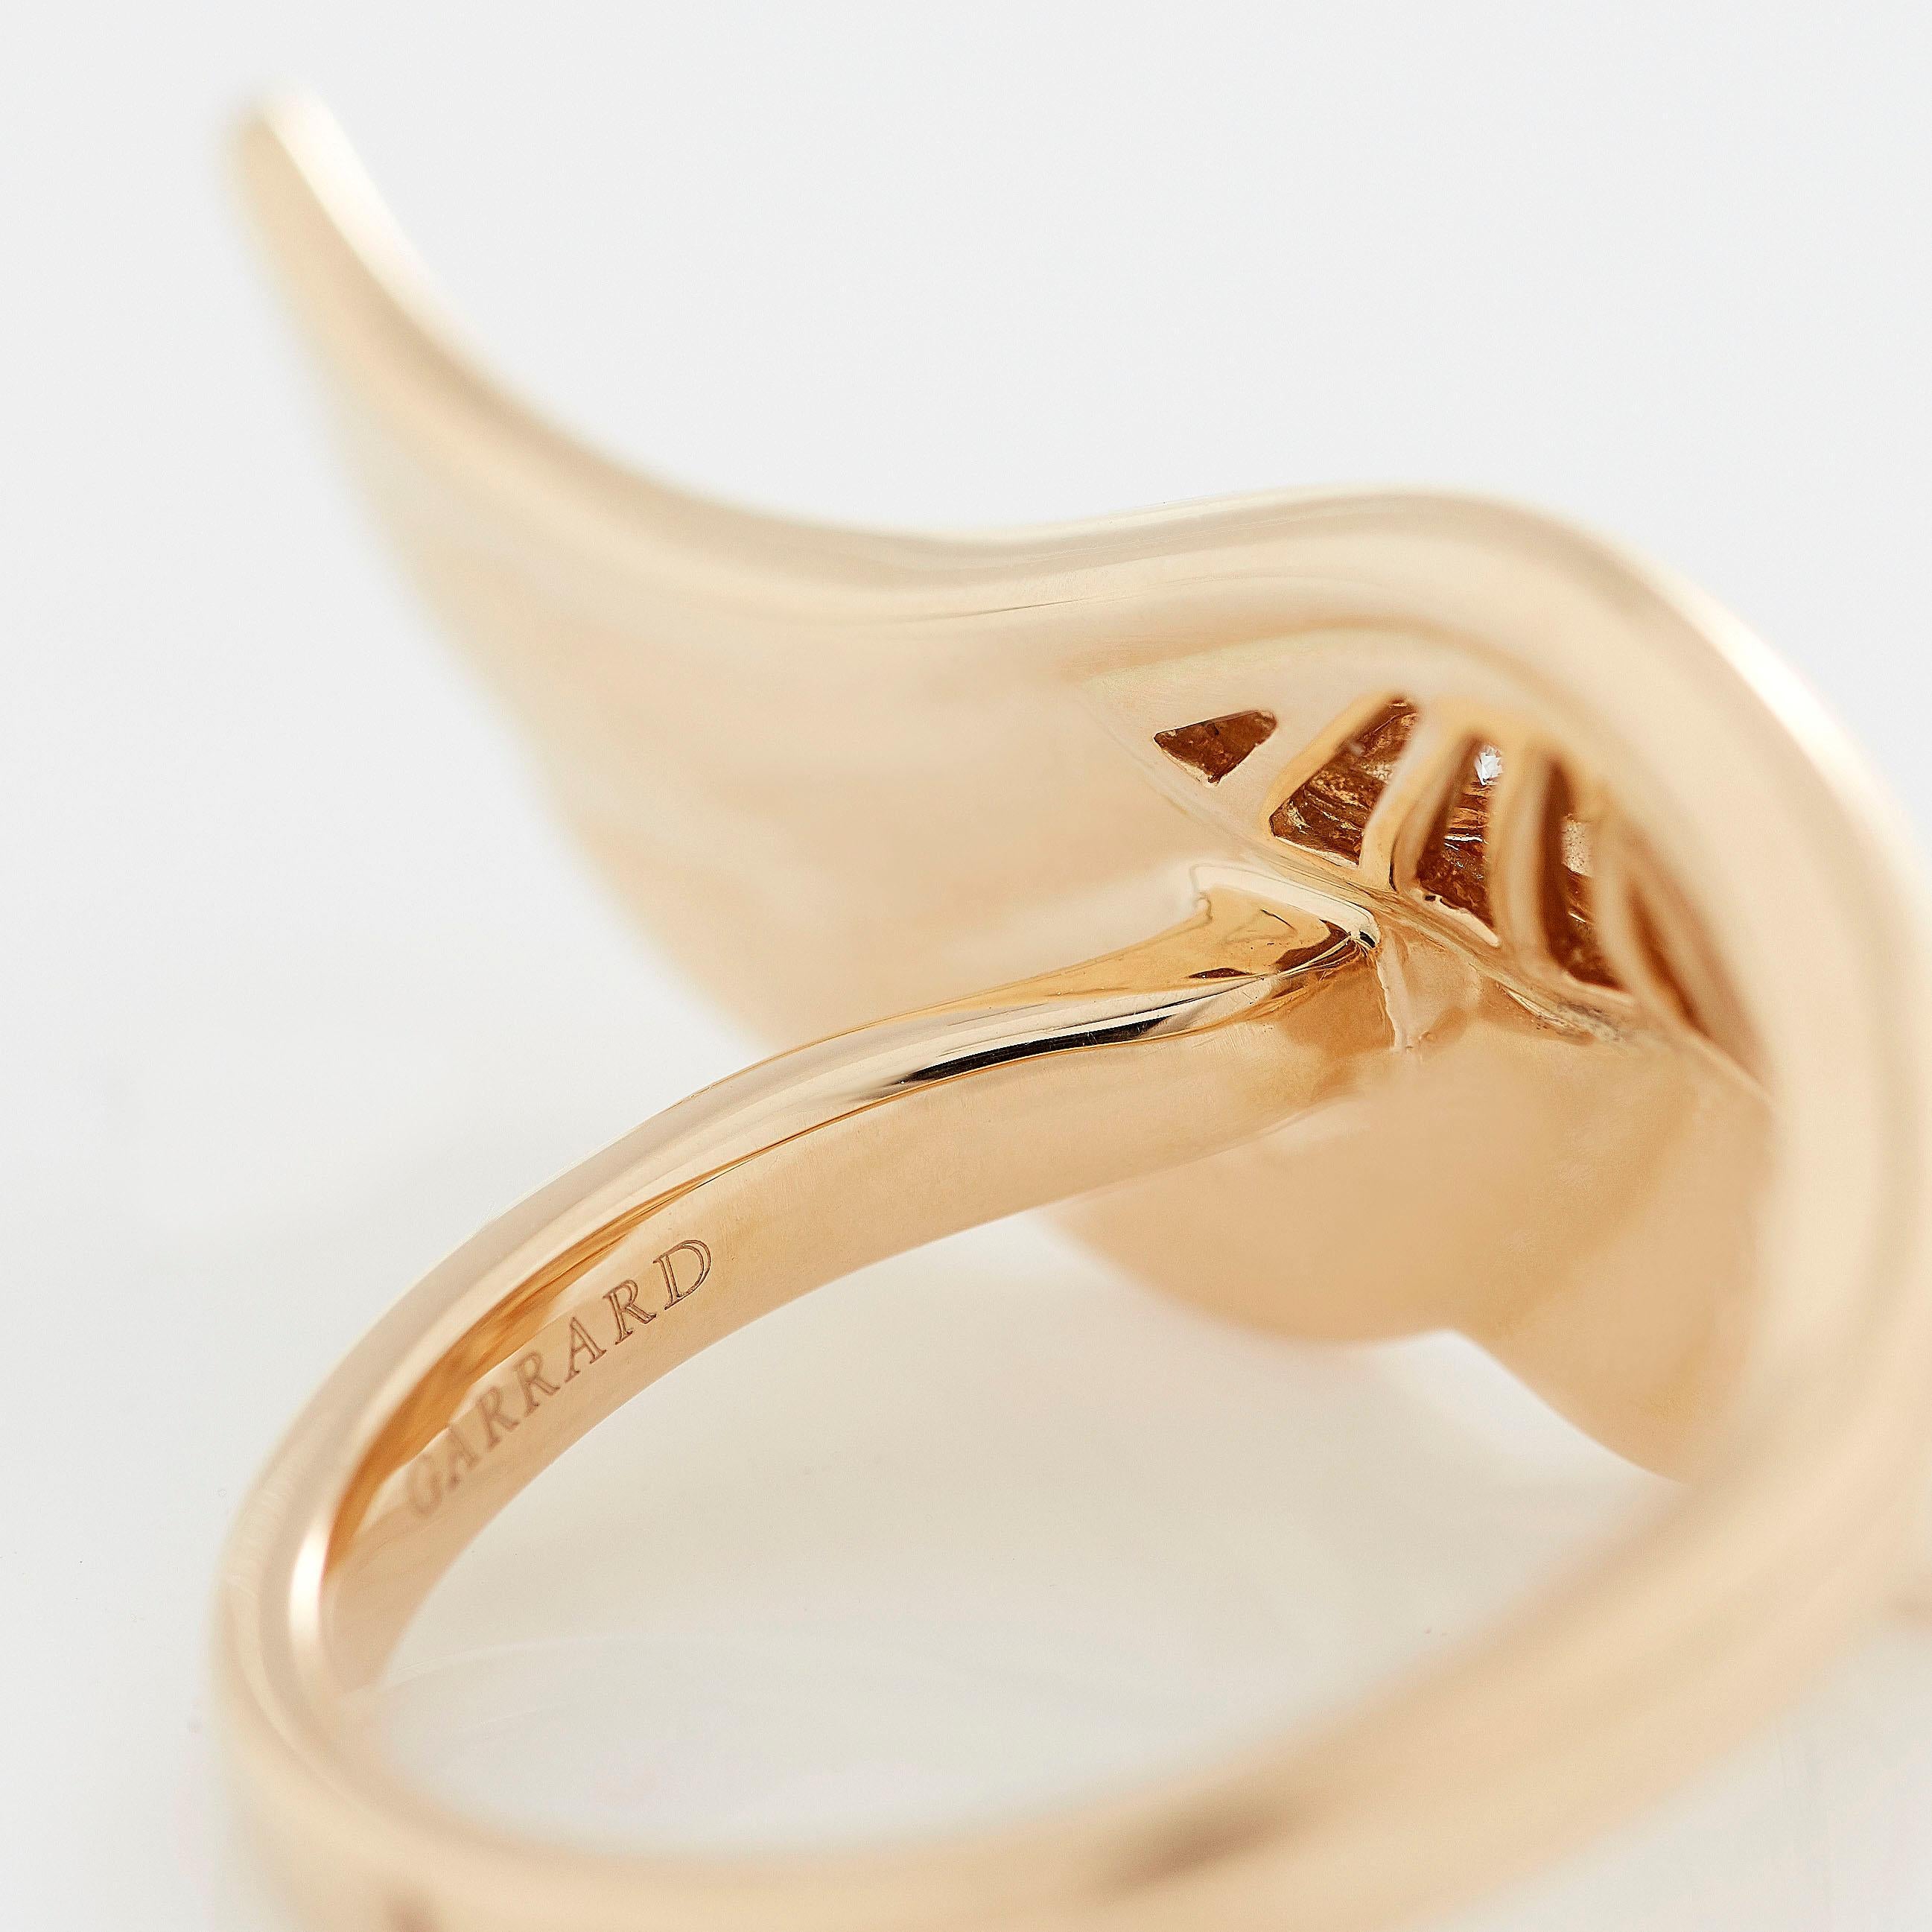 Garrard 'Wings Reflection' 18 Karat Yellow Gold White Diamond and Enamel Ring In New Condition For Sale In London, London